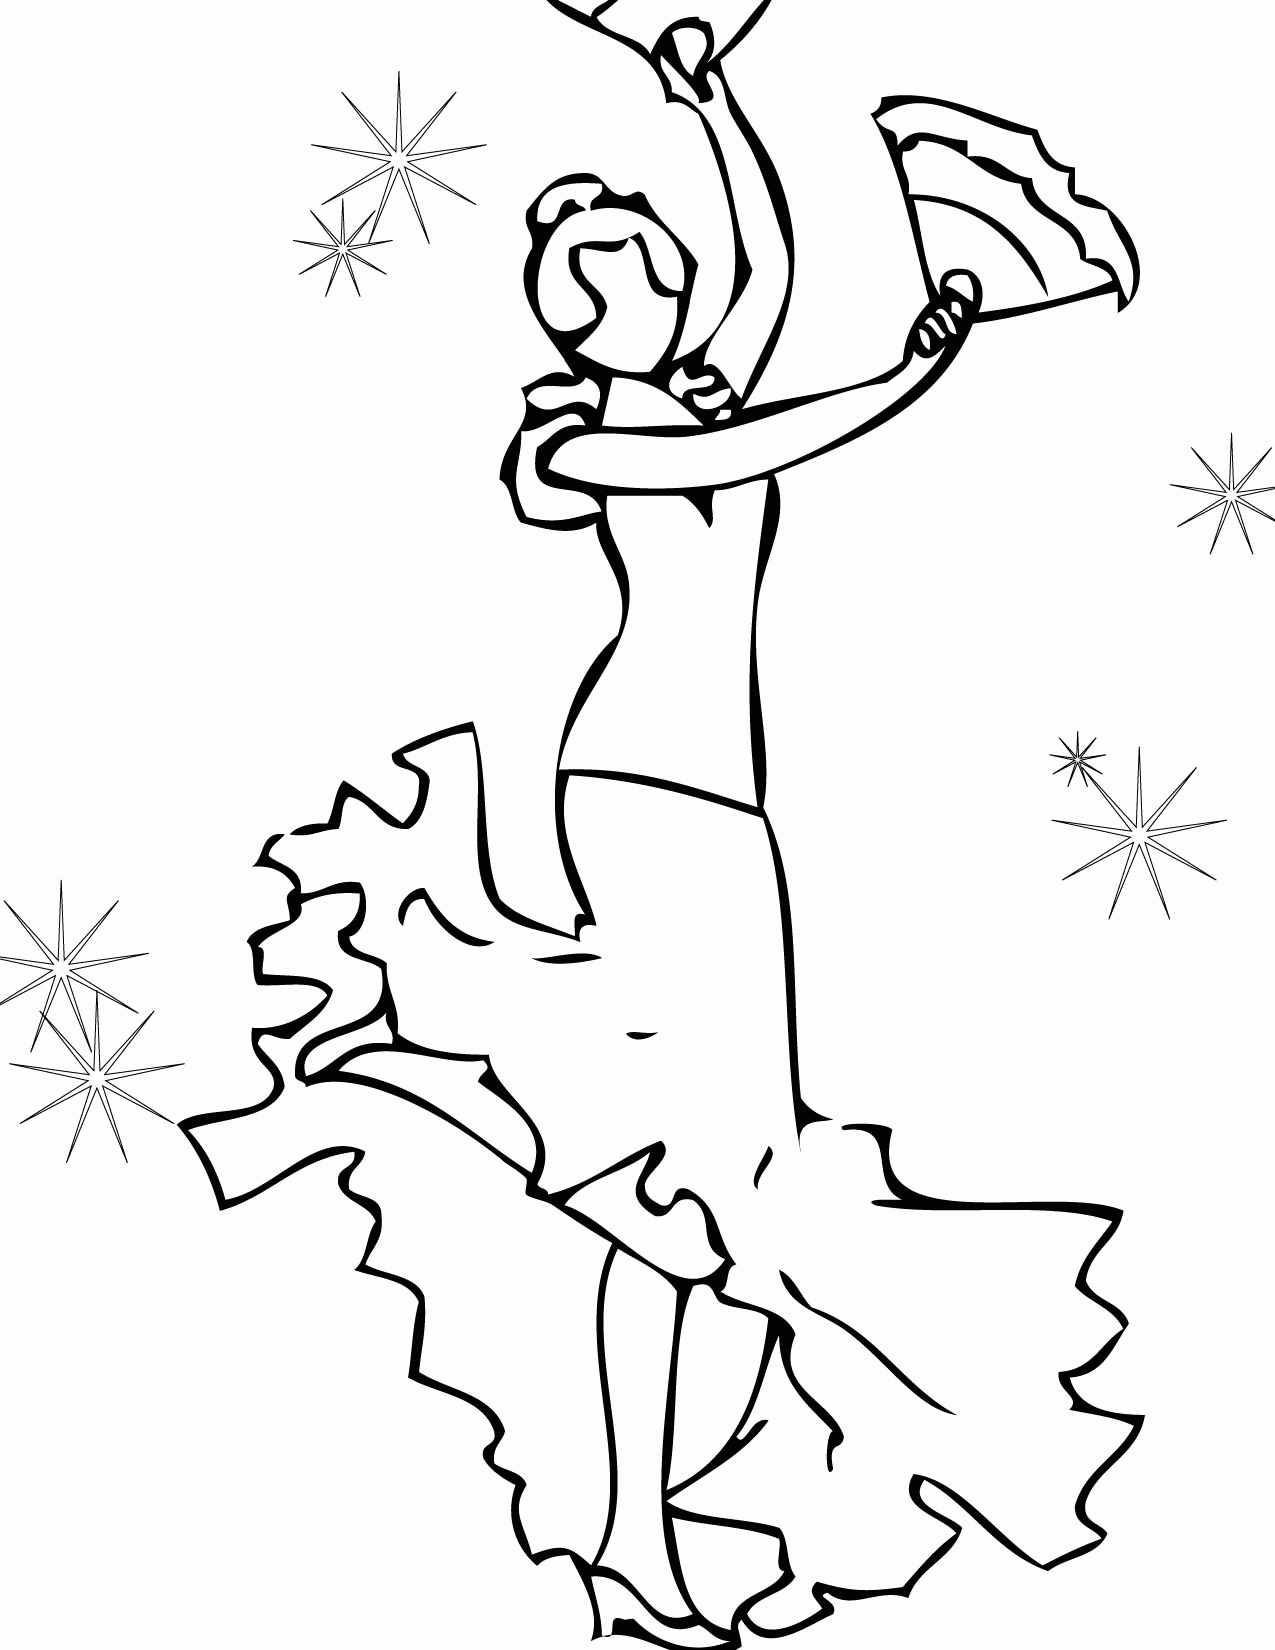 Flamenco Dancer Coloring Pages - Coloring Page